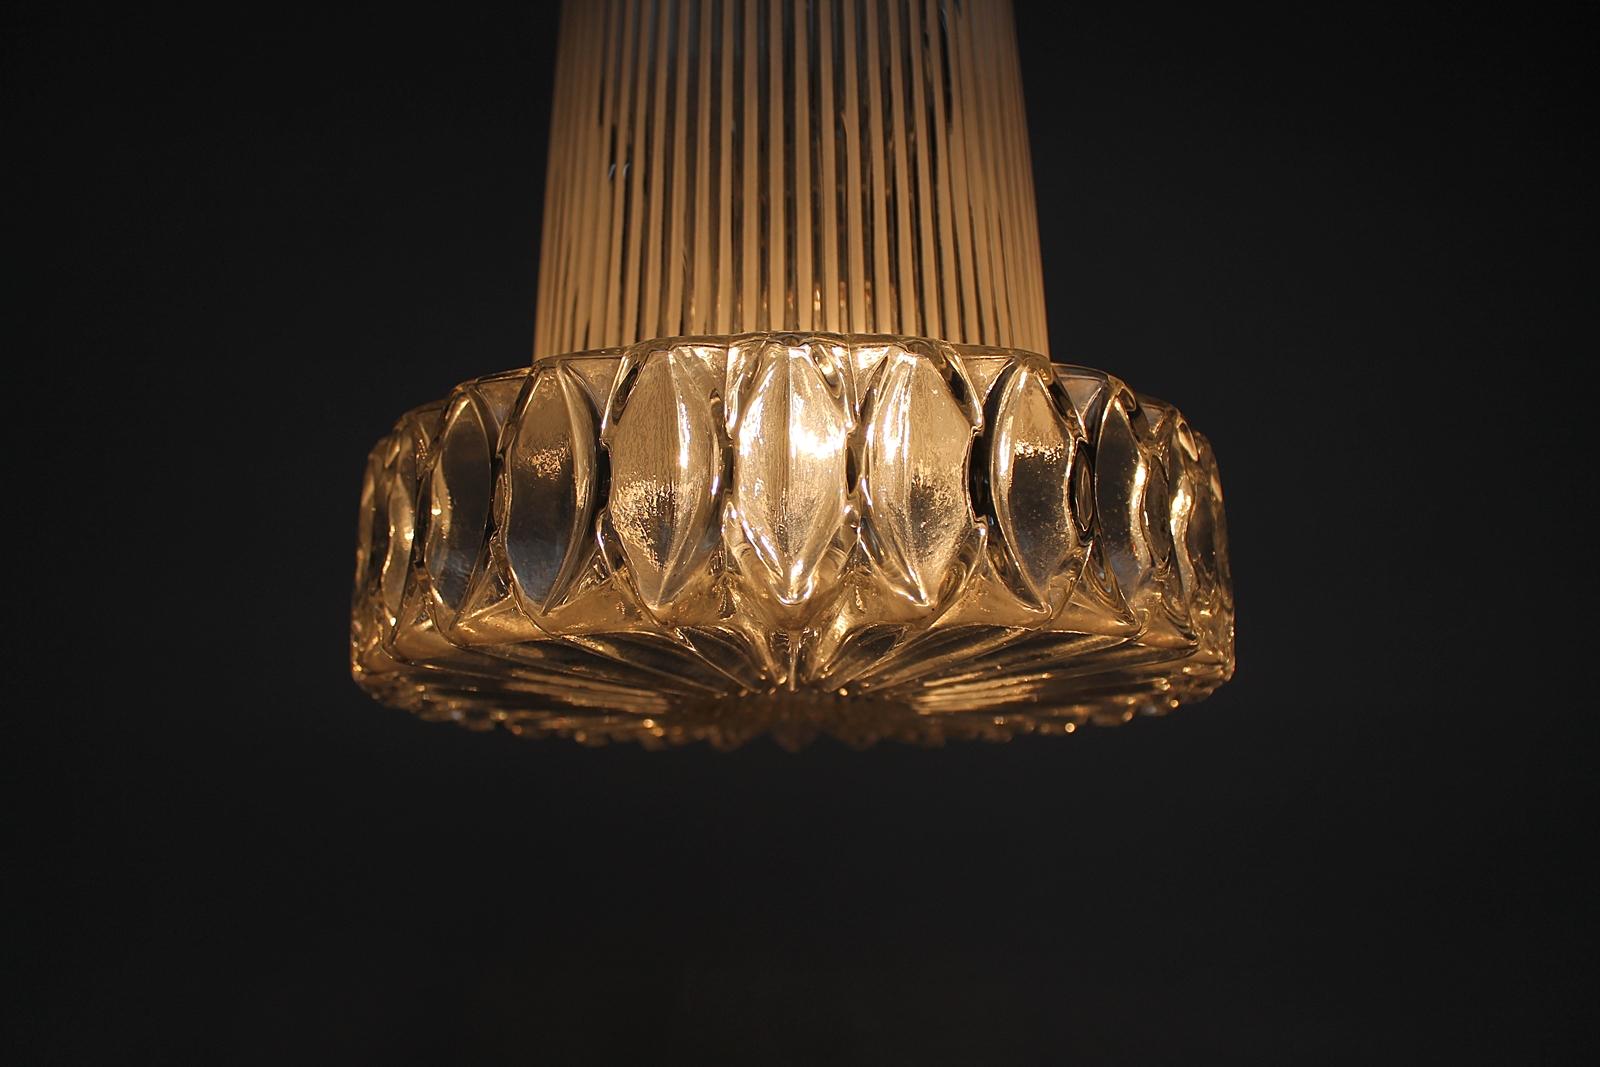 Very rare German origin midcentury large textured glass pendant lamp attributed to Aloys Gangkofner by Peill & Putzler.
Very elegant 1950s design.
Made of very thick patterned glass.
Makes a great charming light and is very decorative in any